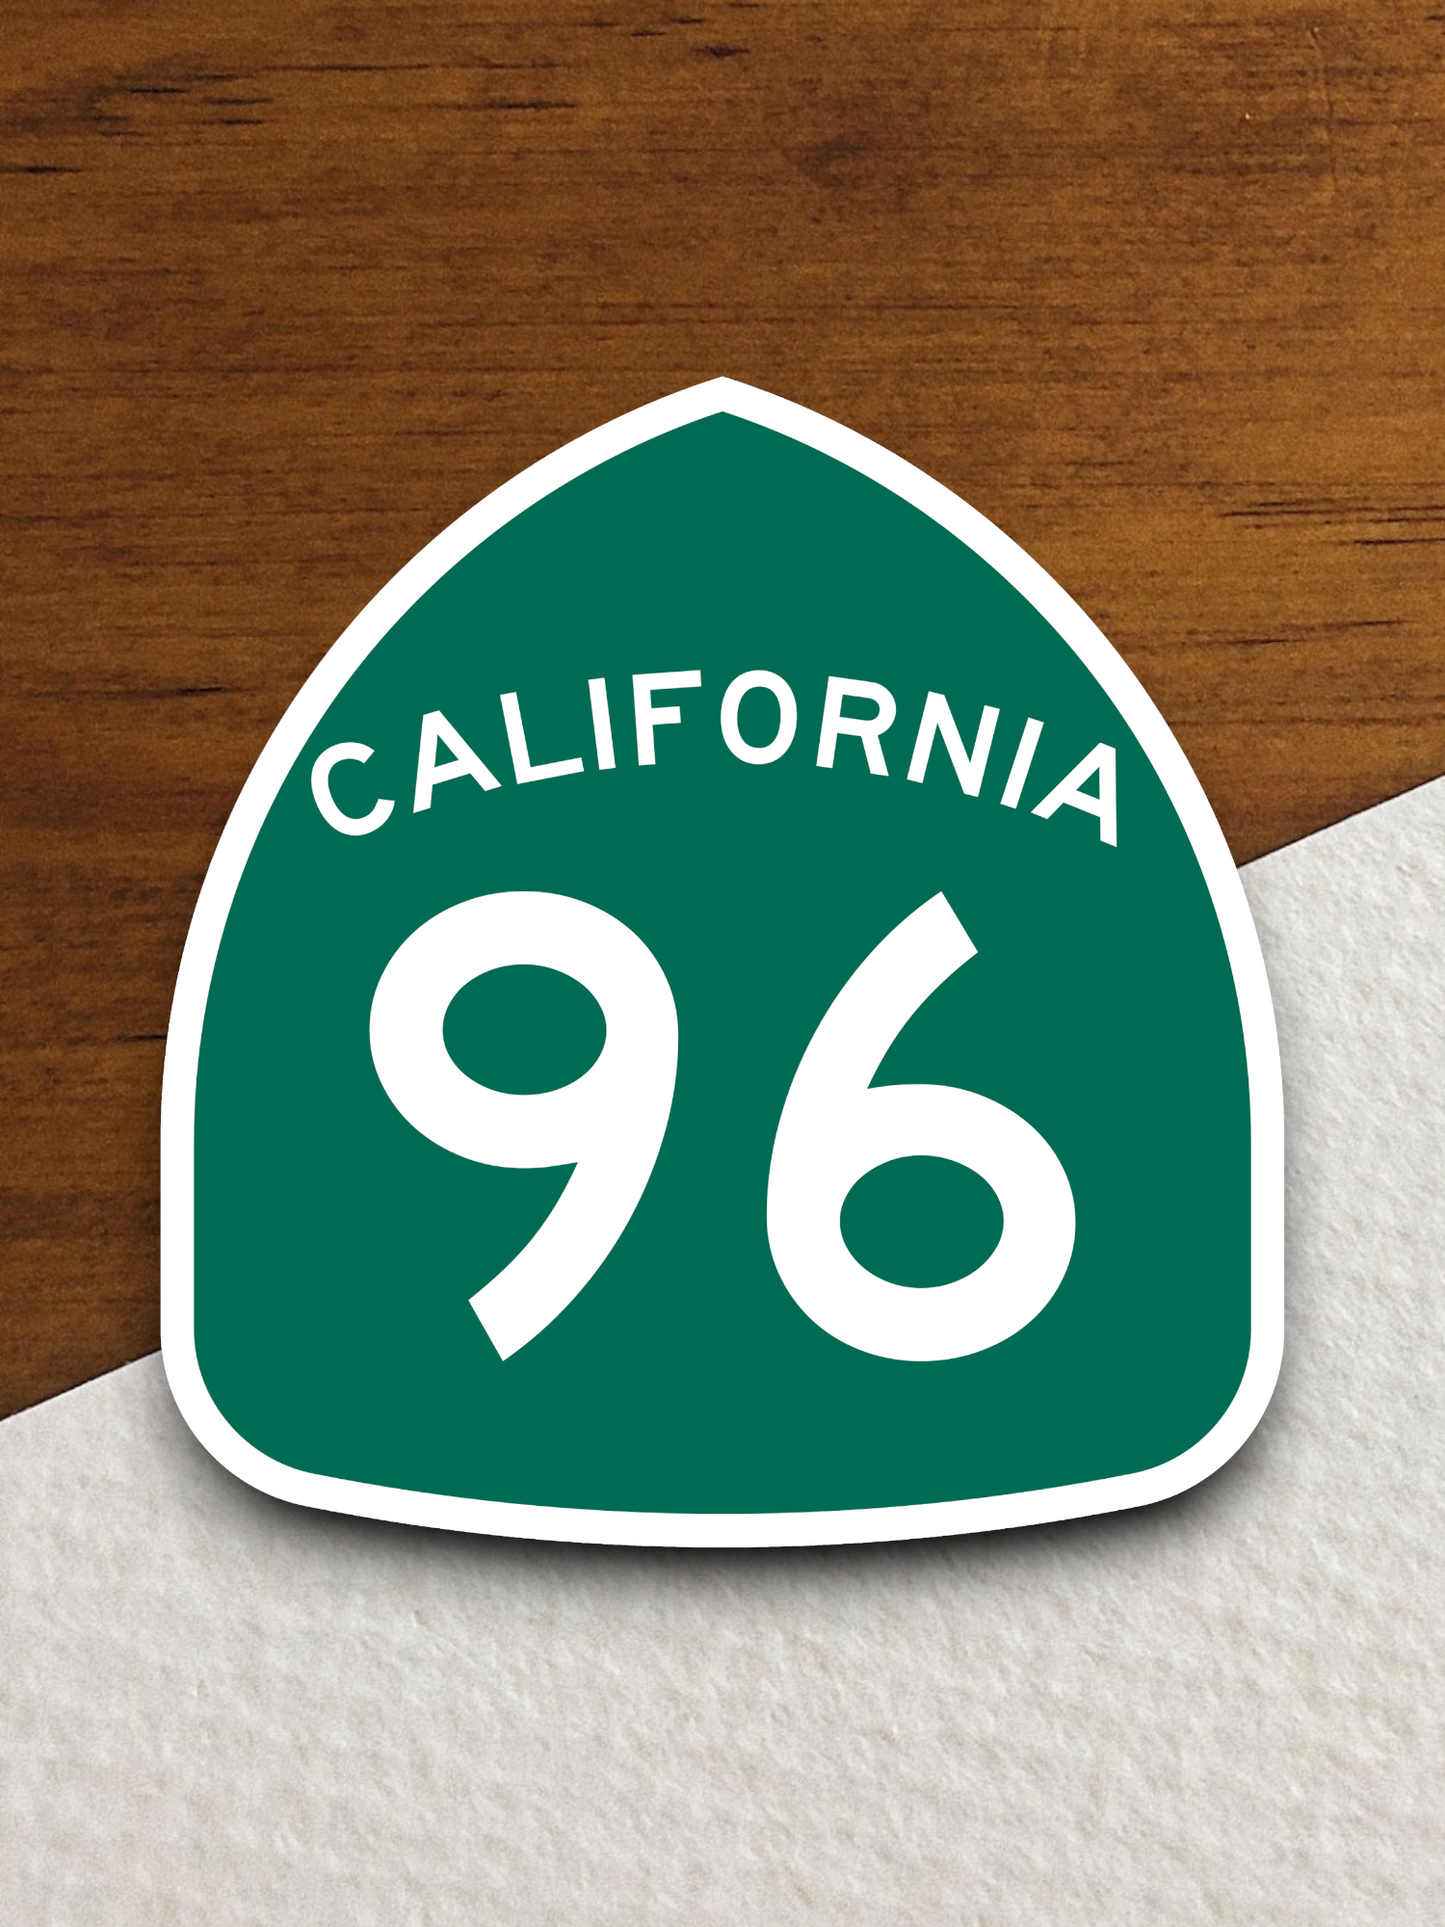 California State Route 96 Road Sign Sticker